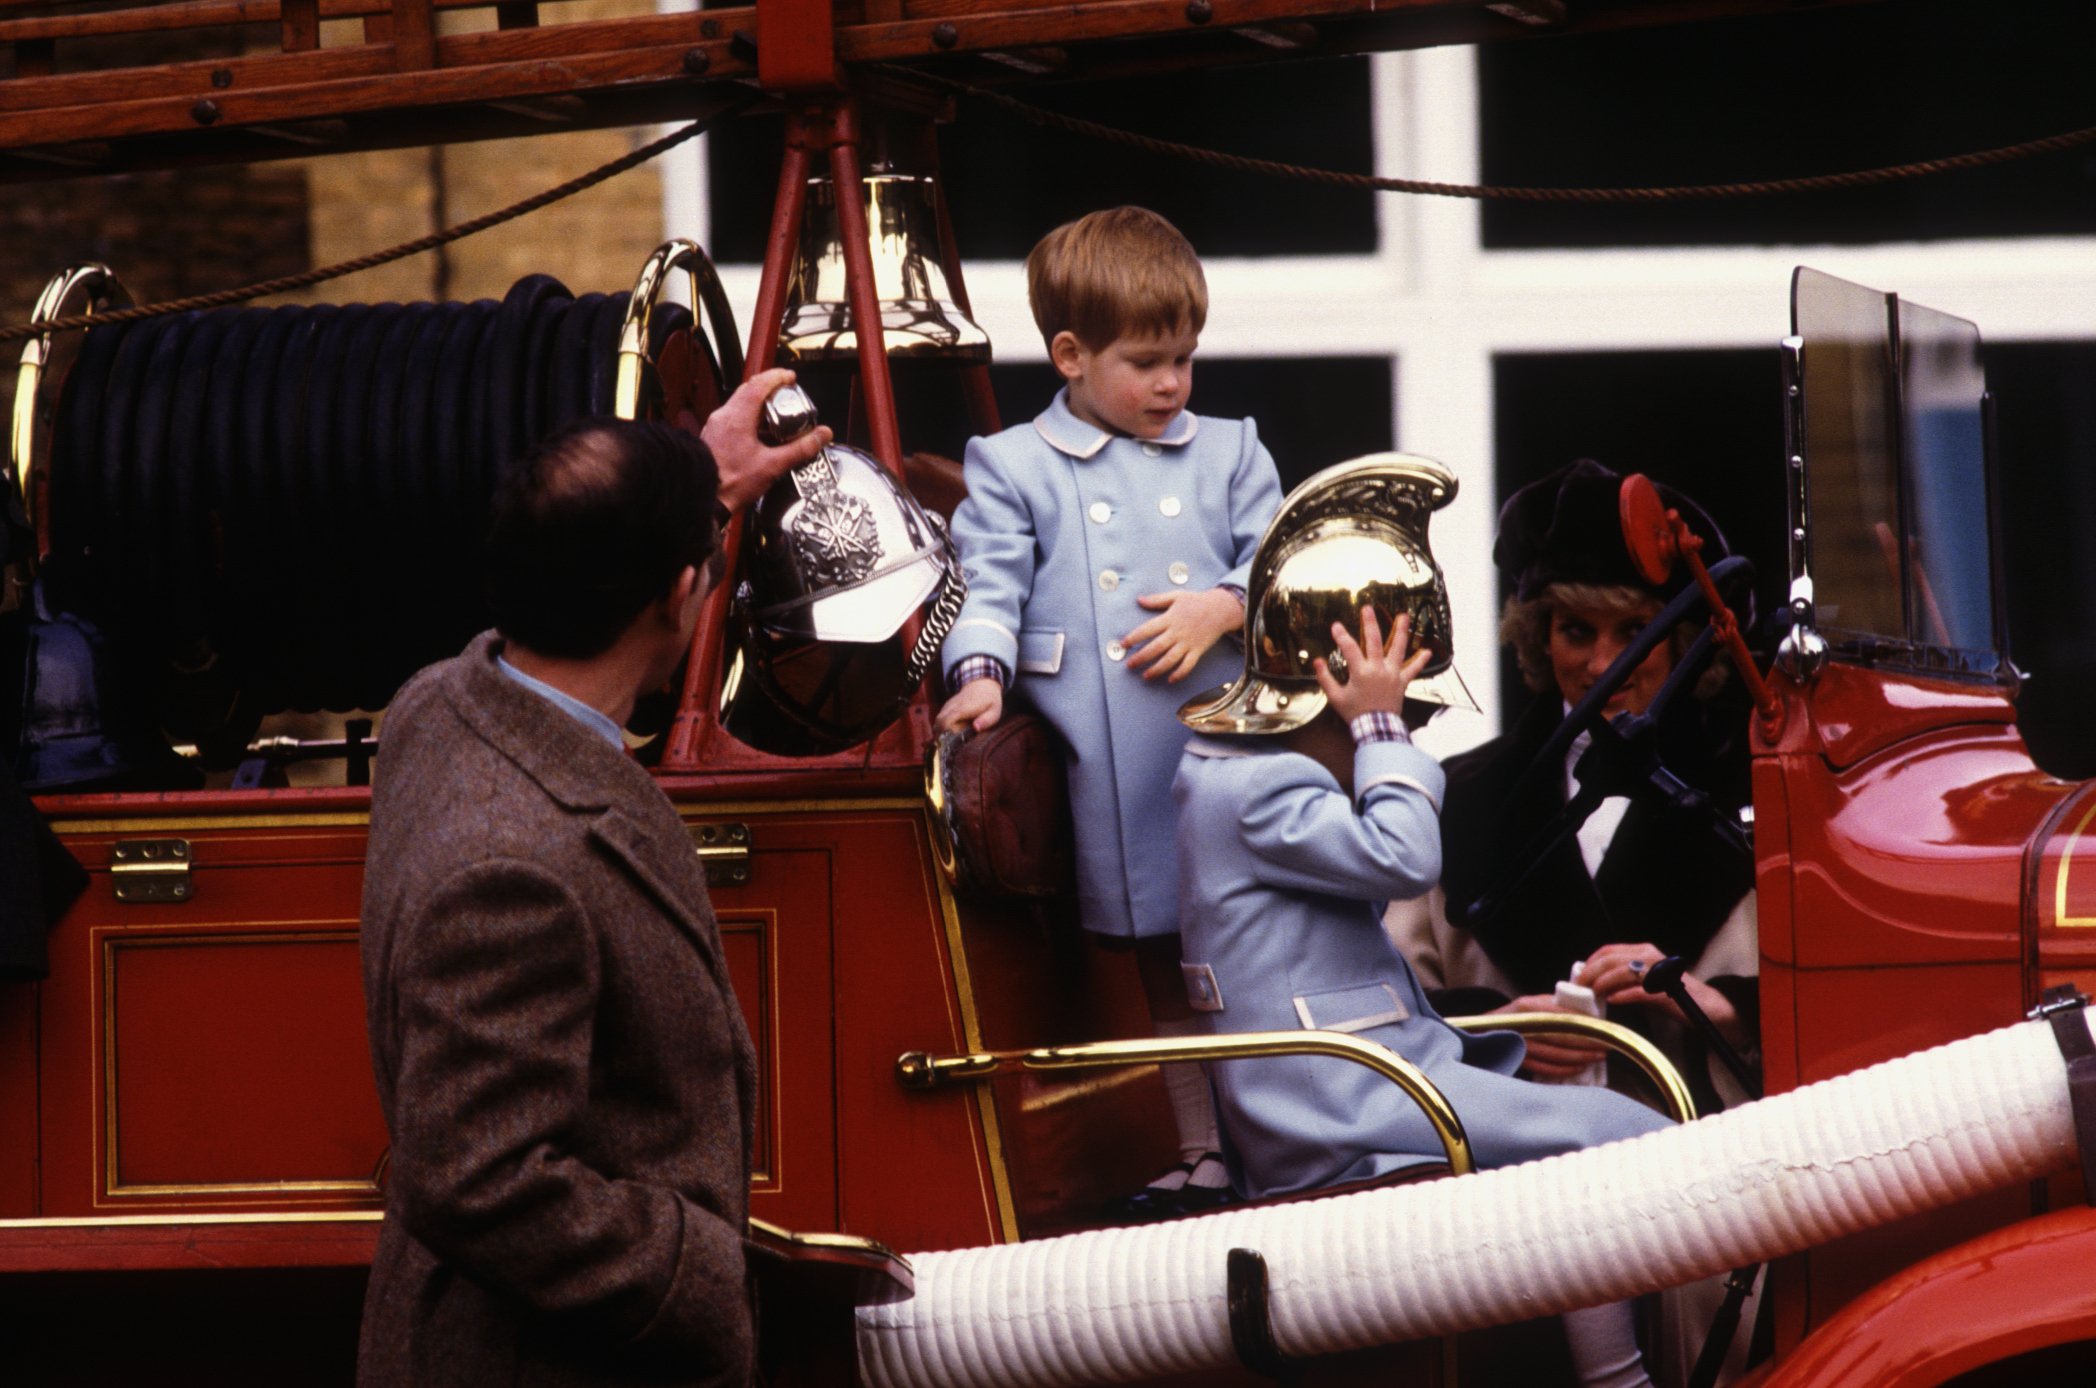 Prince Charles and his wife, Princess Diana, with their sons Prince Harry and Prince William who are pictured playing on a vintage fire engine at Sandringham. / Source: Getty Images